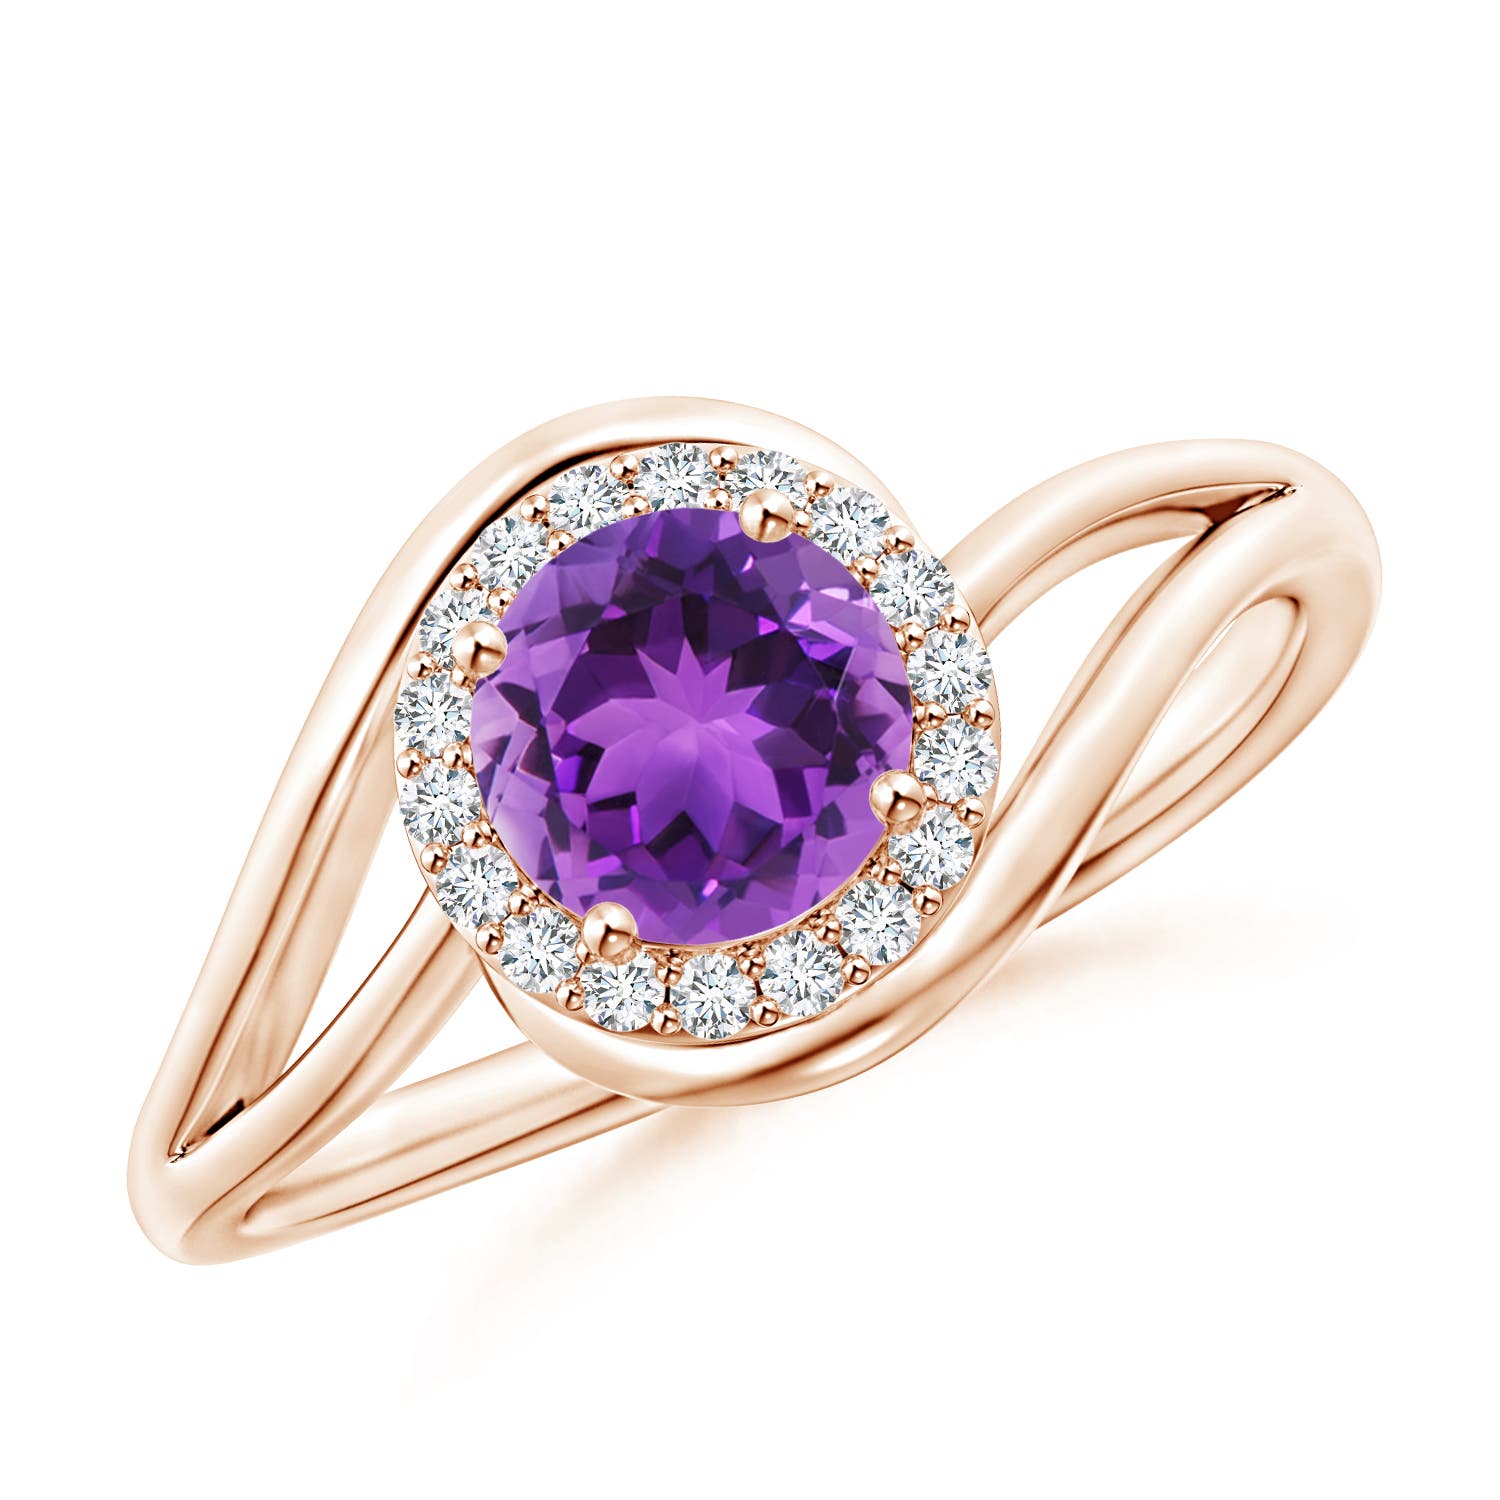 AAA - Amethyst / 0.91 CT / 14 KT Rose Gold